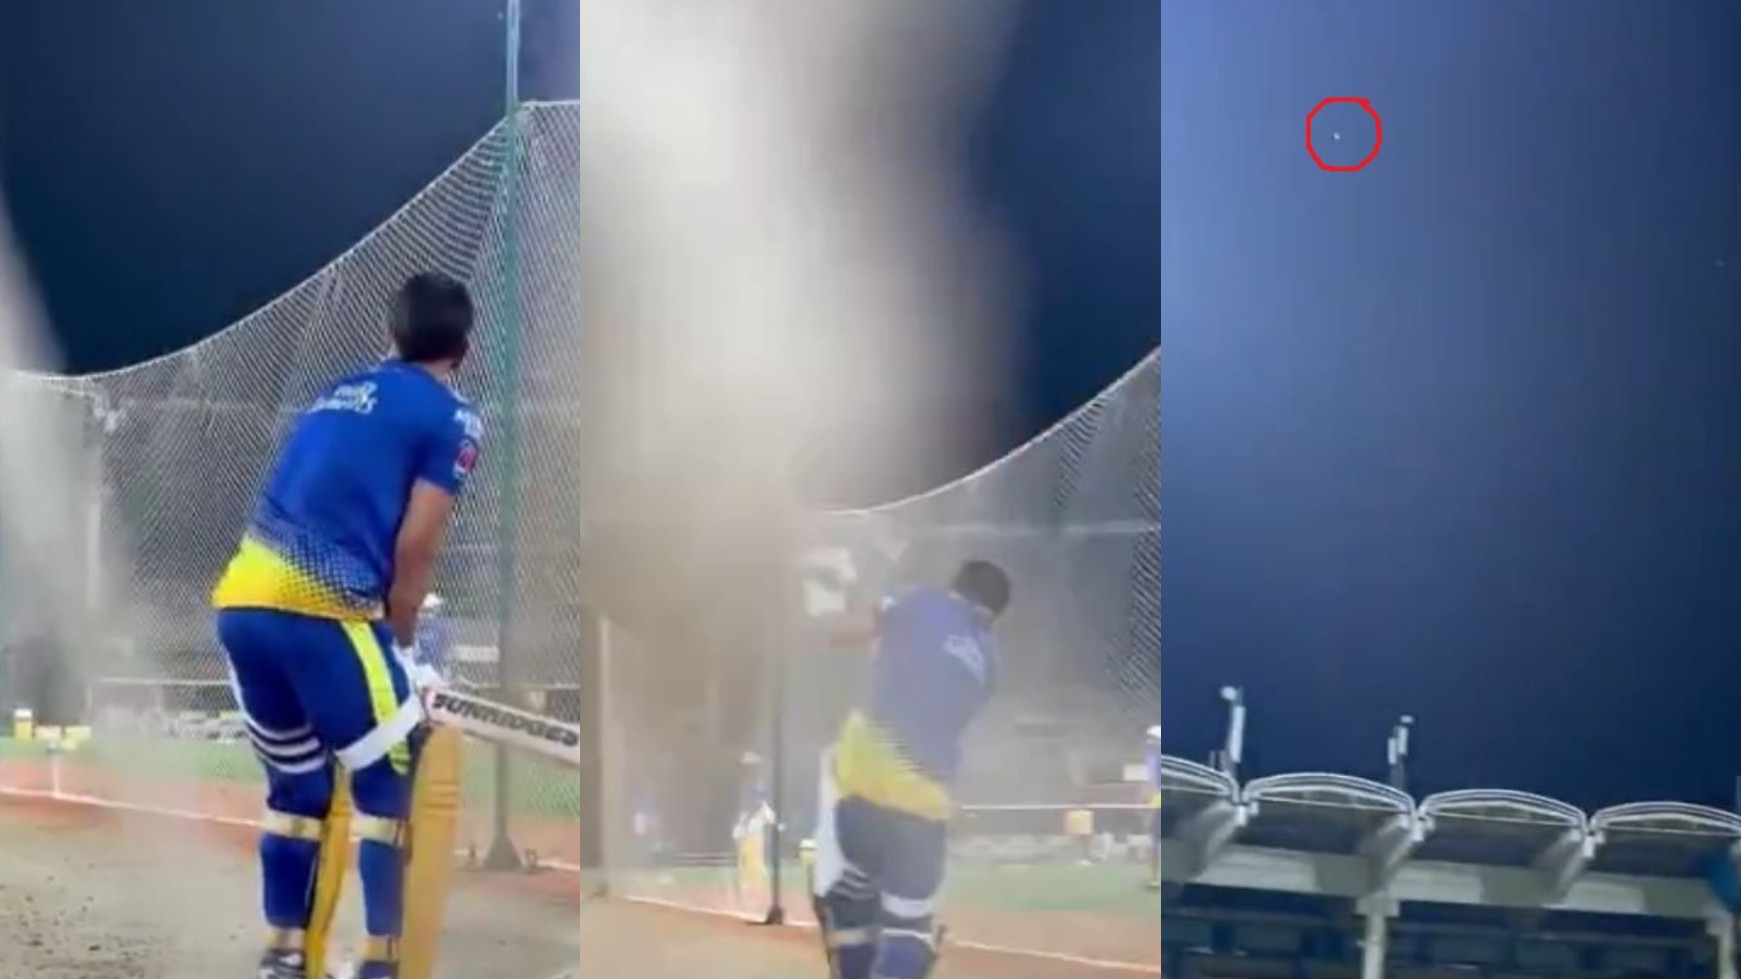 IPL 2021: WATCH- MS Dhoni’s huge six sends the ball in orbit during nets session